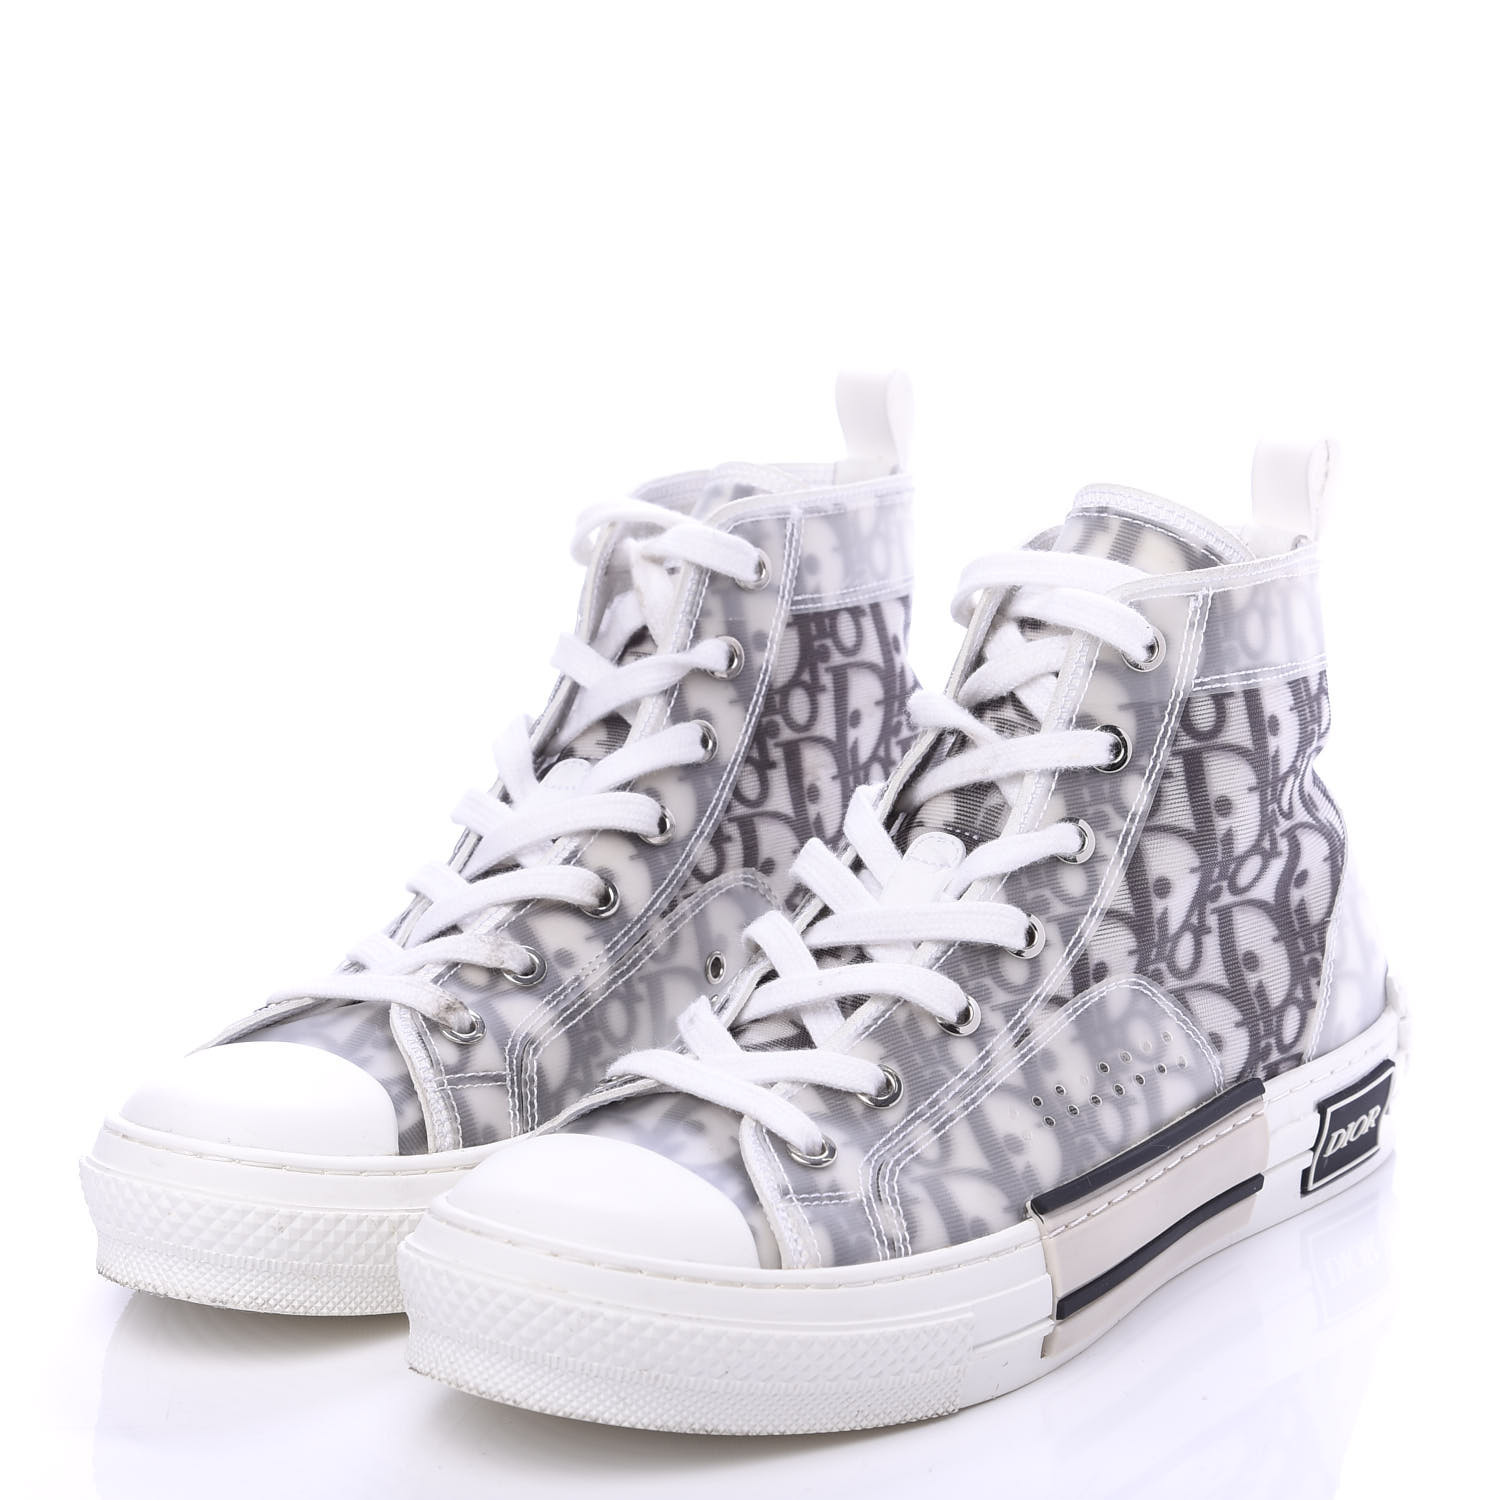 CHRISTIAN DIOR Canvas Oblique Mens B23 High Top Sneakers 39 White